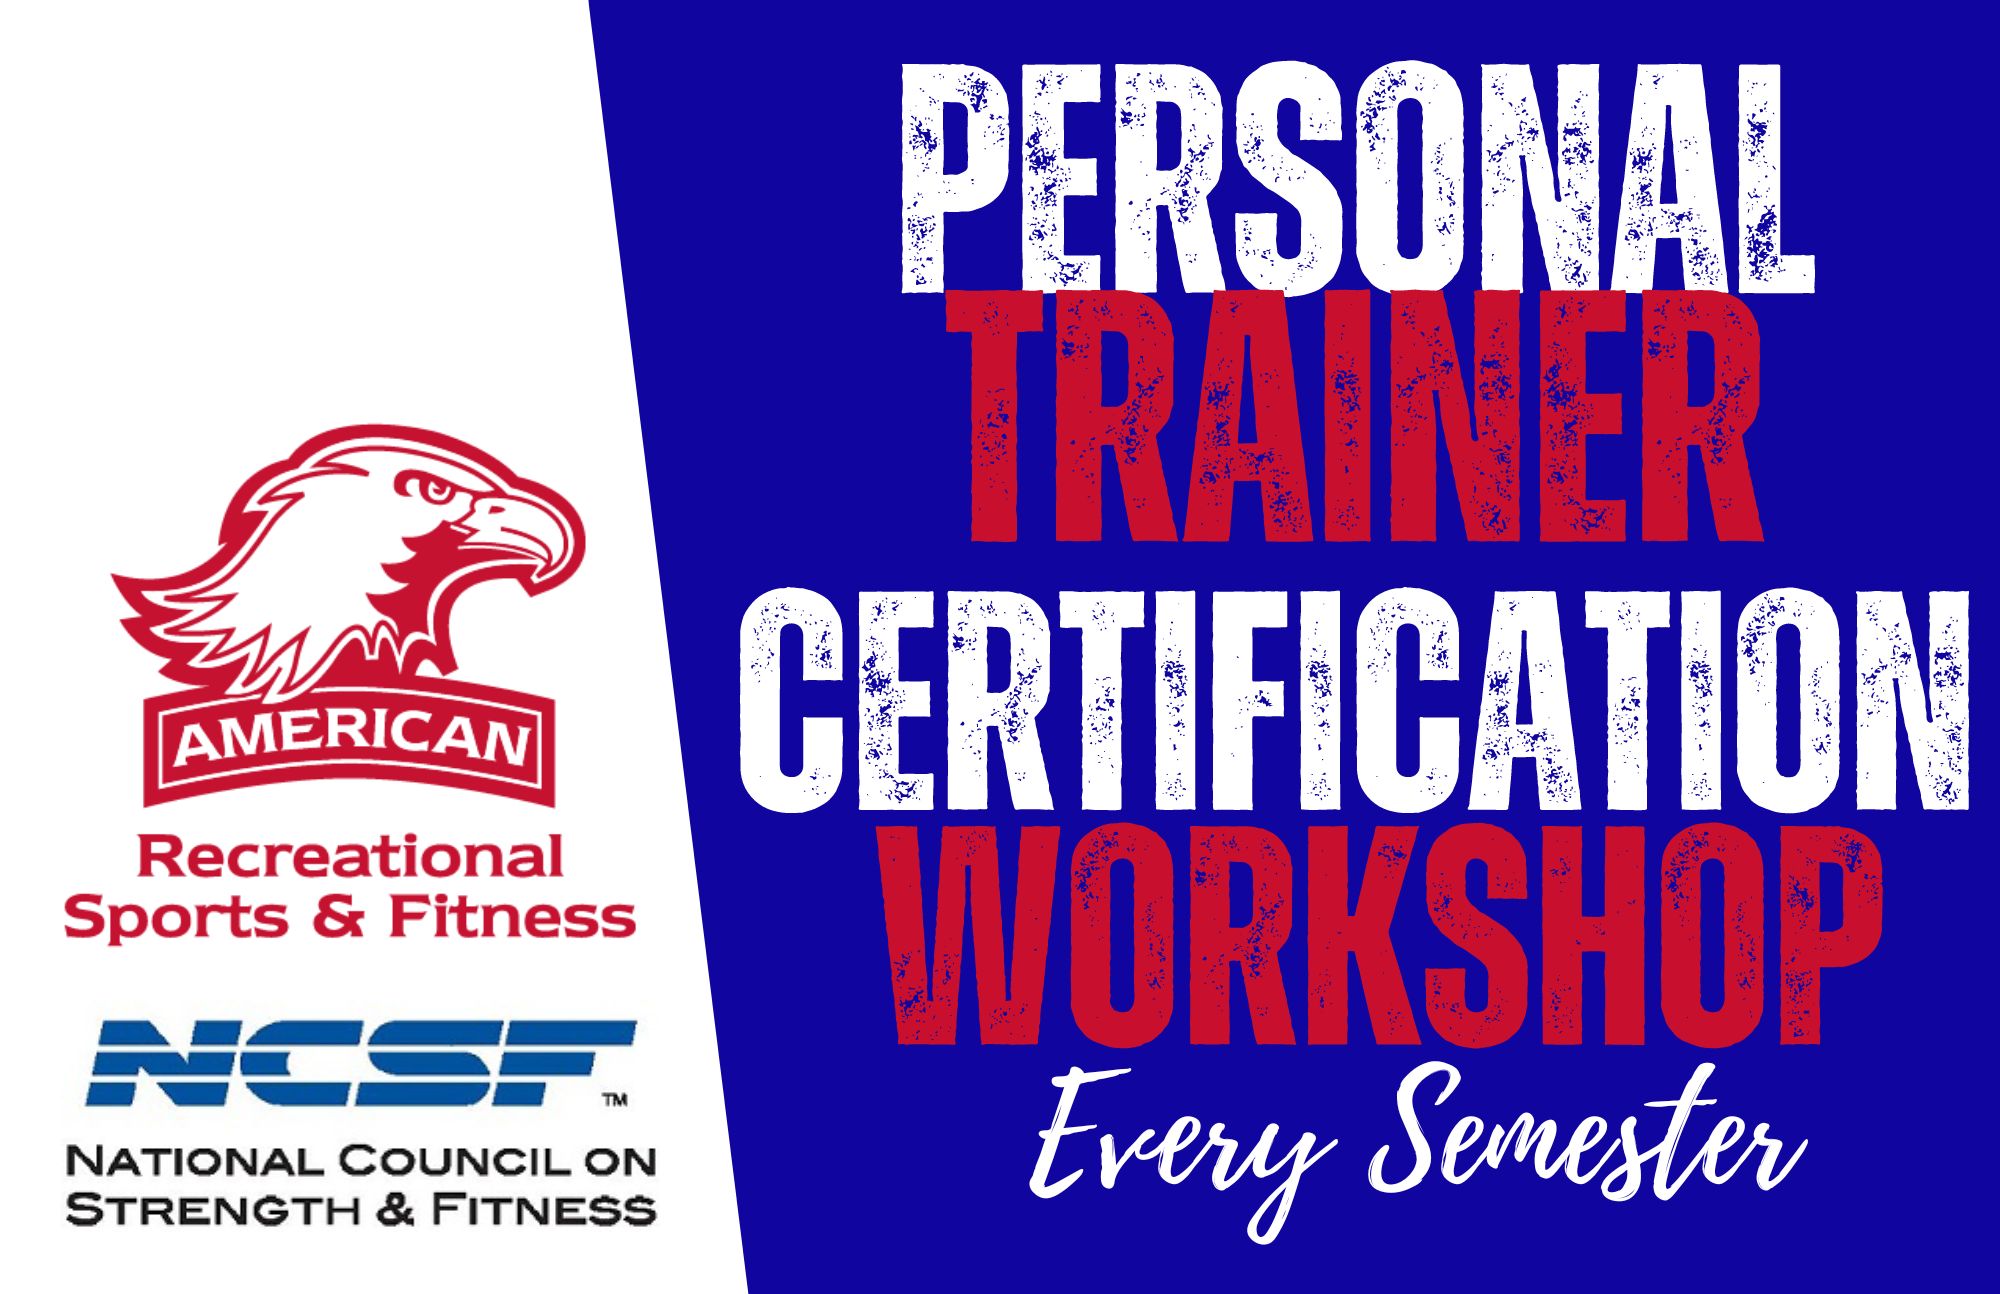 Join the AU Workshop to certify in Personal Training